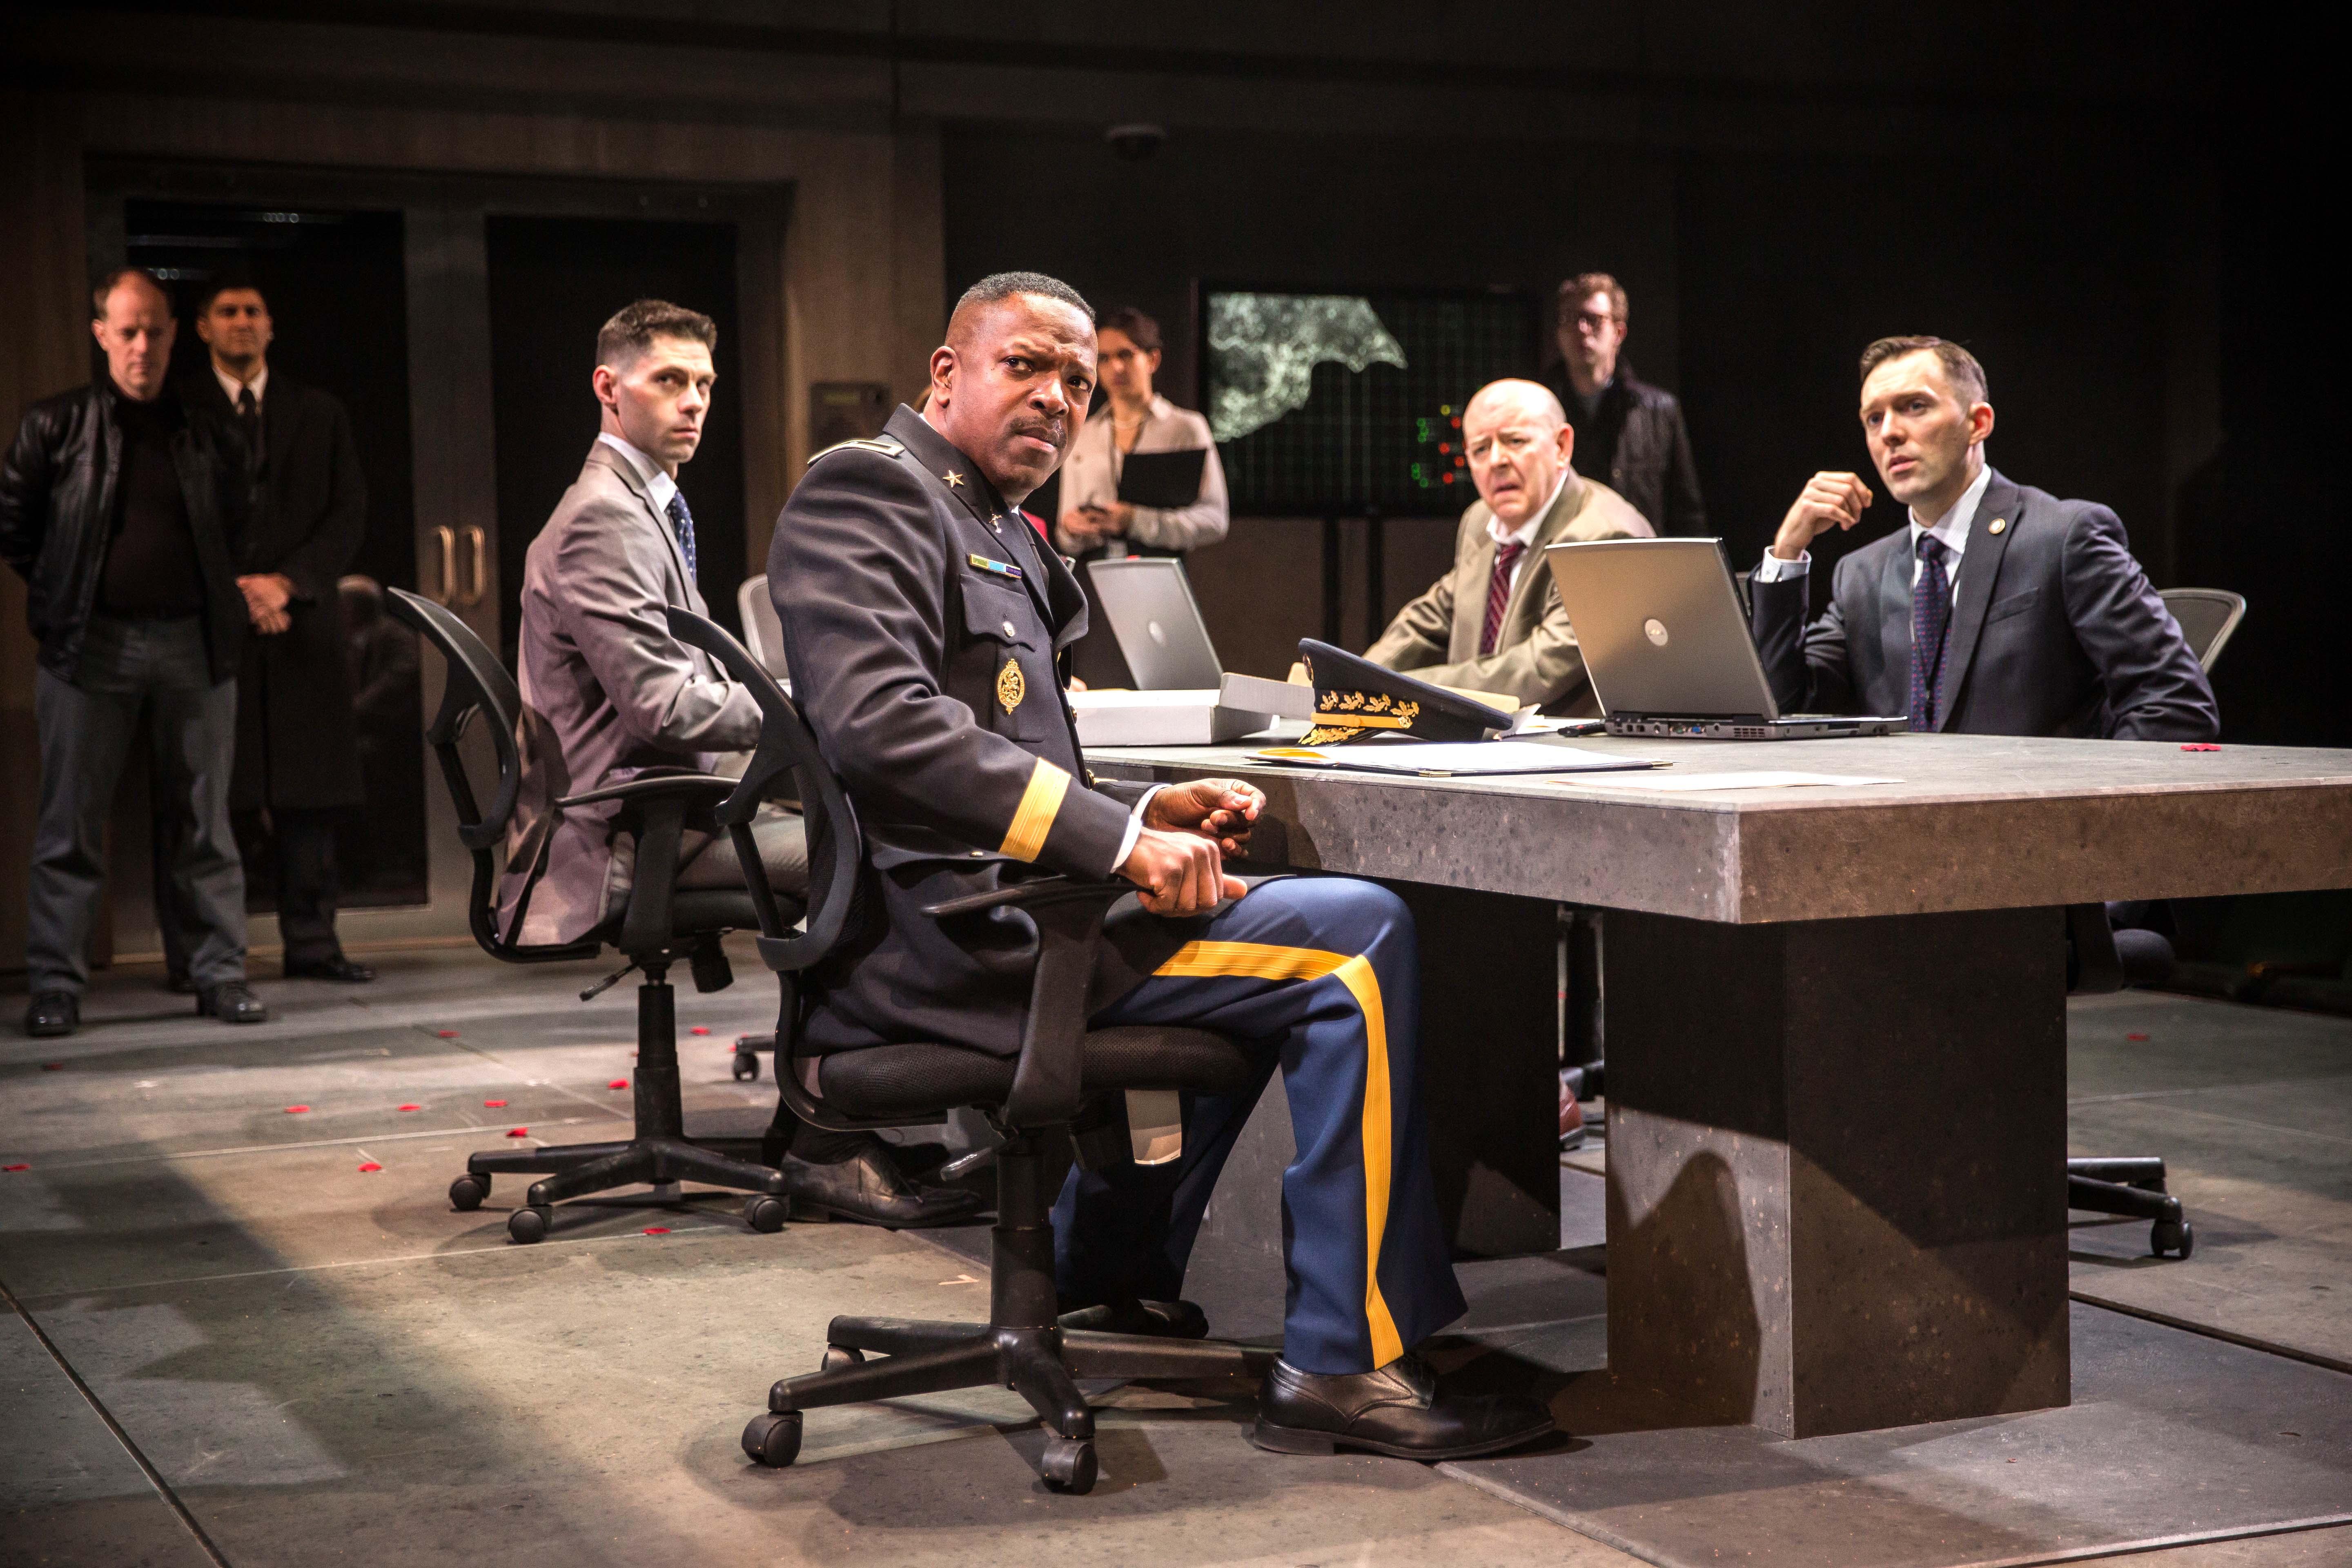 Othello (James Vincent Meredith, center) is a distinguished commander in the Duke’s war council in Chicago Shakespeare Theater’s production of "Othello," directed by Jonathan Munby. (Liz Lauren)